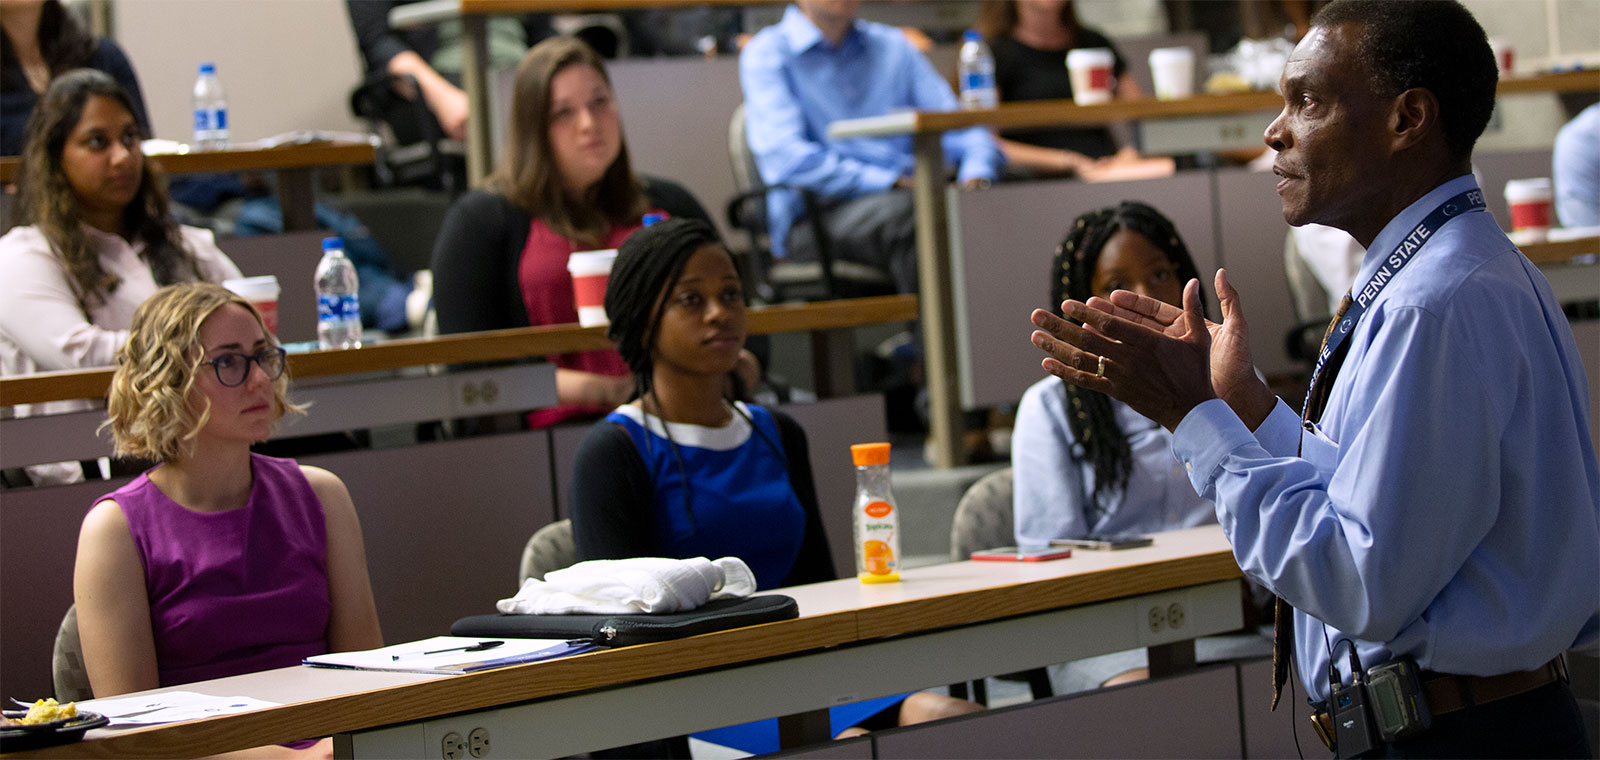 Dr. Dwight Davis addresses students at the 2019 MD student orientation in Hershey, Pa. He is gesturing with his hands and students are seen sitting in rows in a lecture hall in front of him.